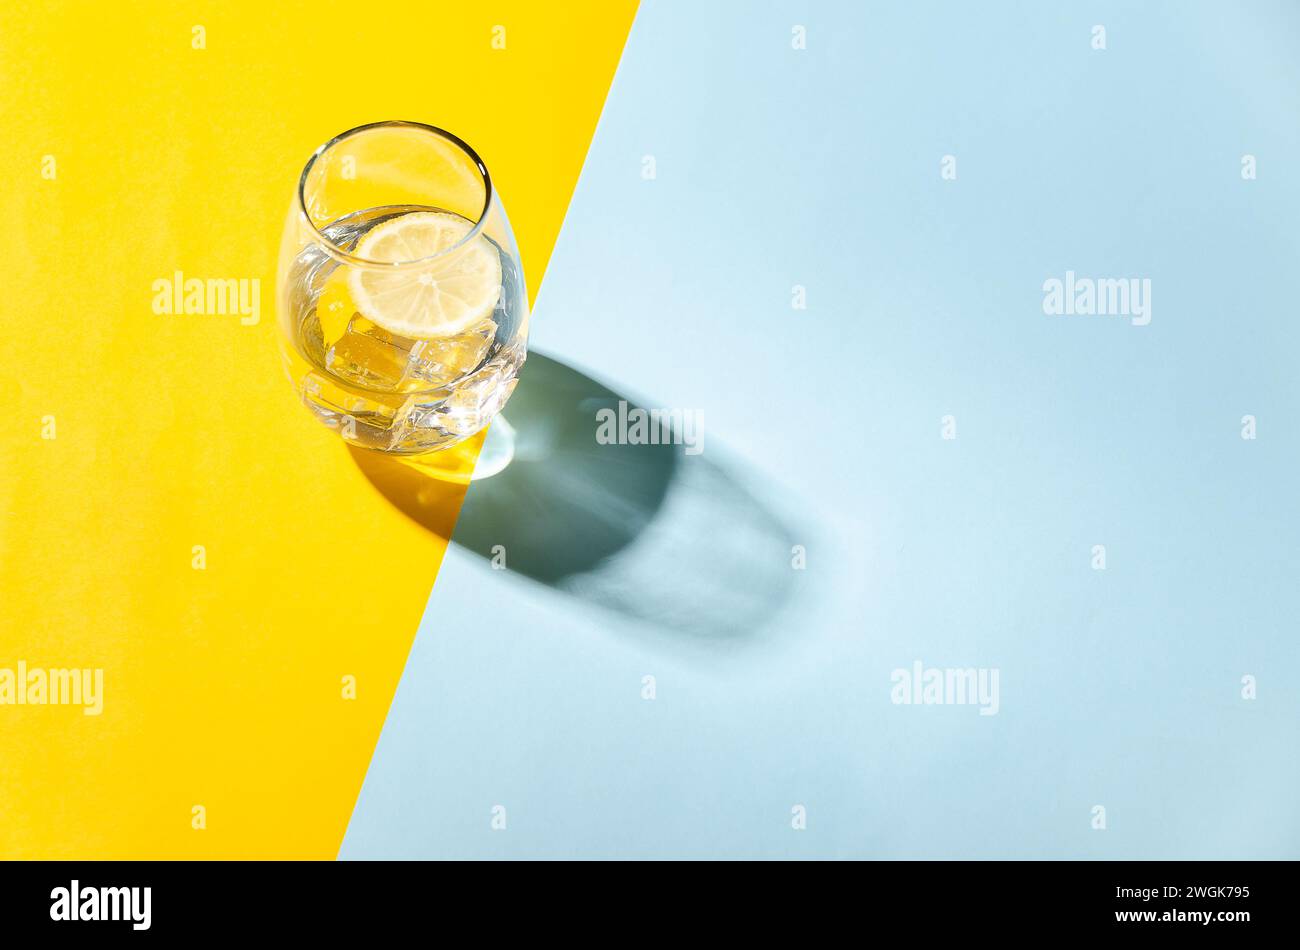 A glass of water with a slice of lemon and ice cubes, on a yellow and blue background with copy space. Stock Photo